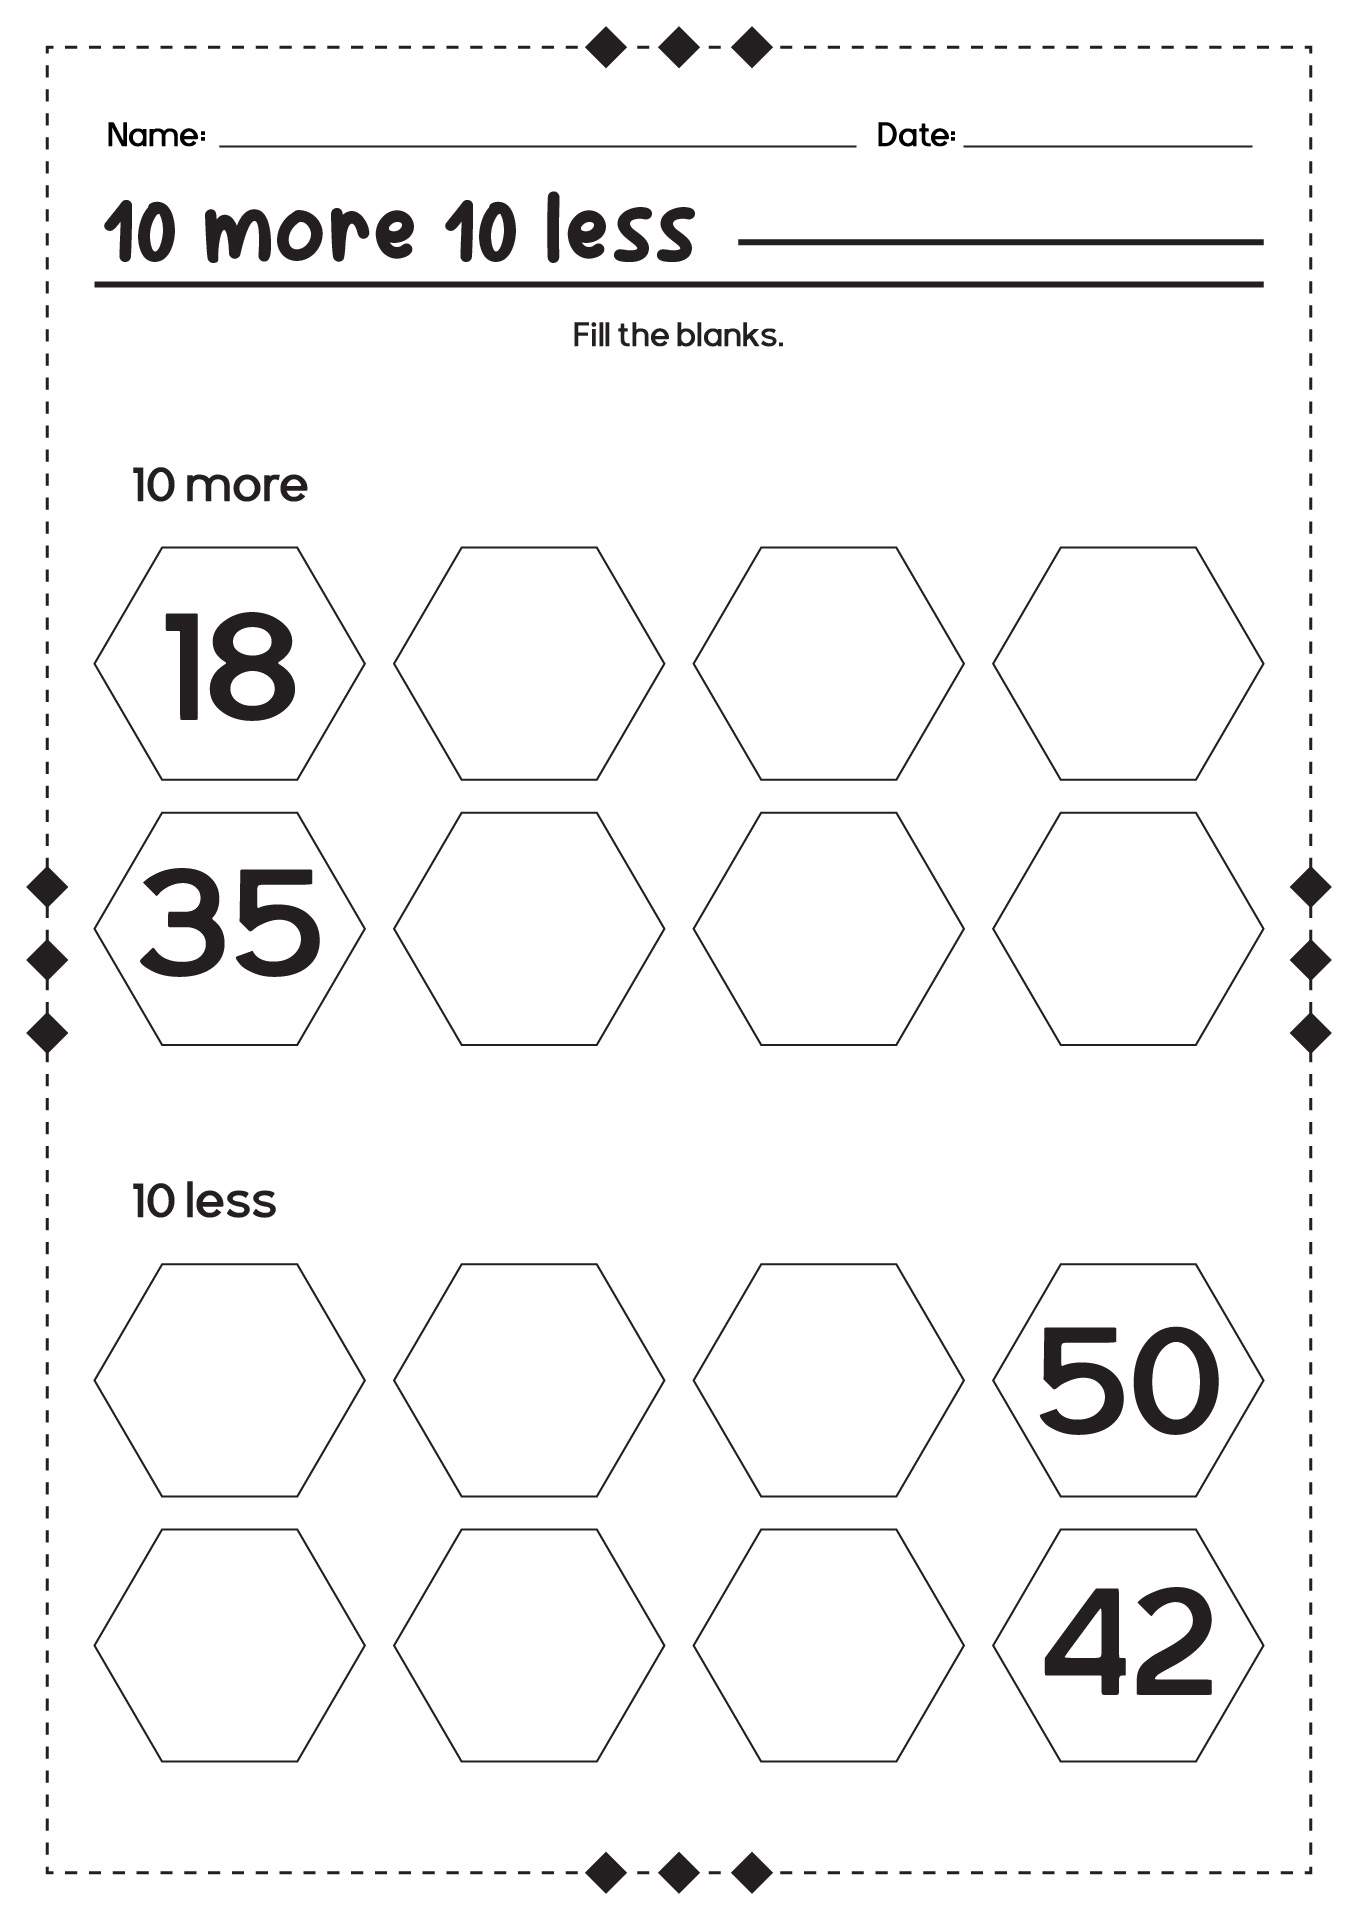 15 Best Images of 10 More Or Less Worksheets - 10 More 10% ...